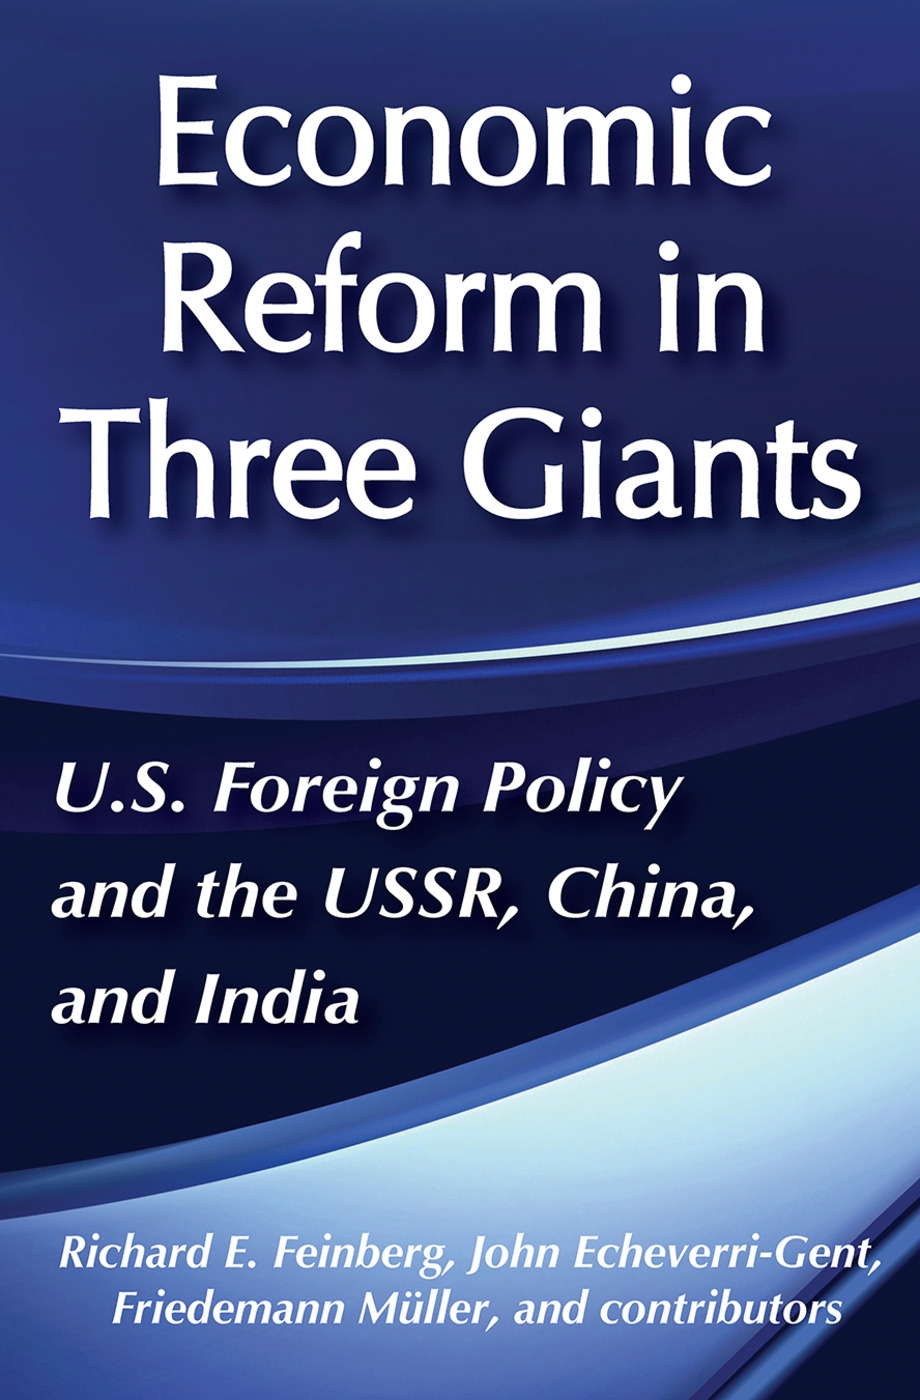 Economic Reform in Three Giants: U.S. Foreign Policy and the Ussr, China, and India